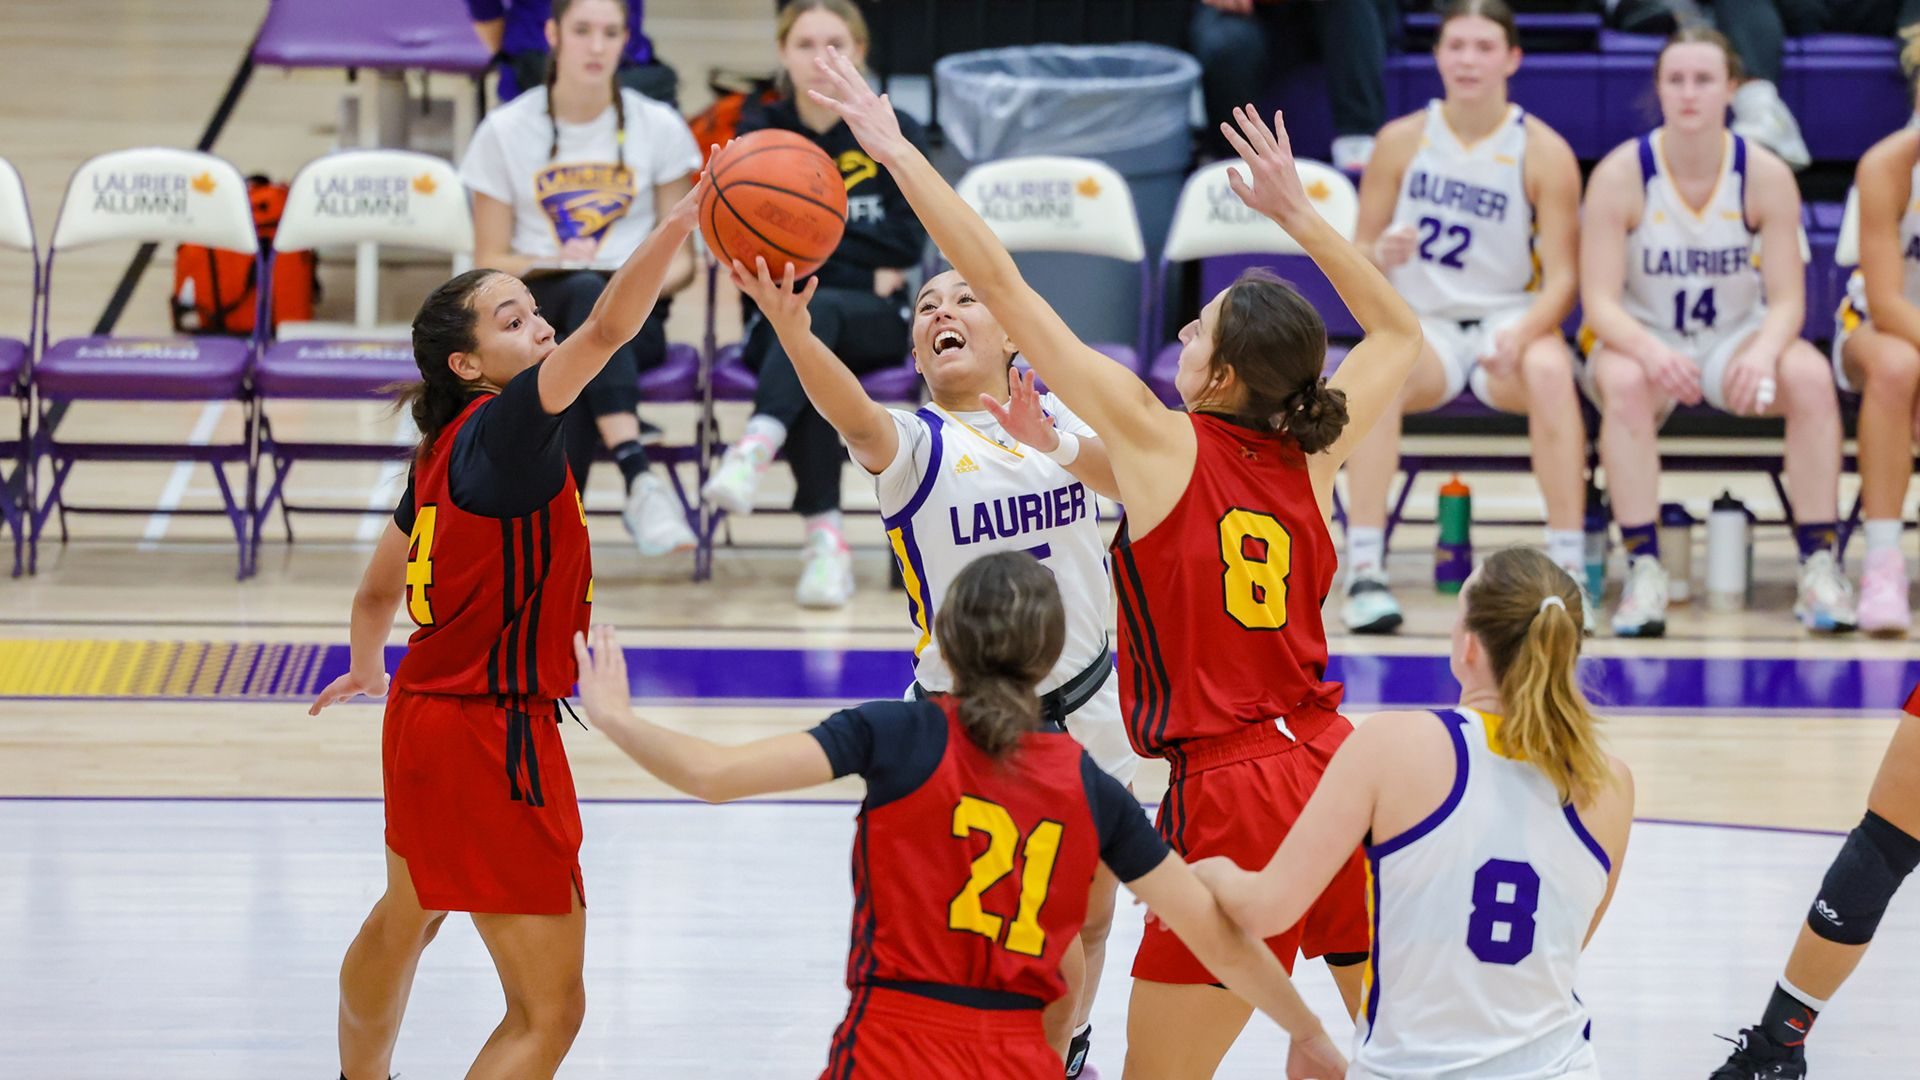 Laurier Women’s Basketball Fall to Guelph in Tough Match